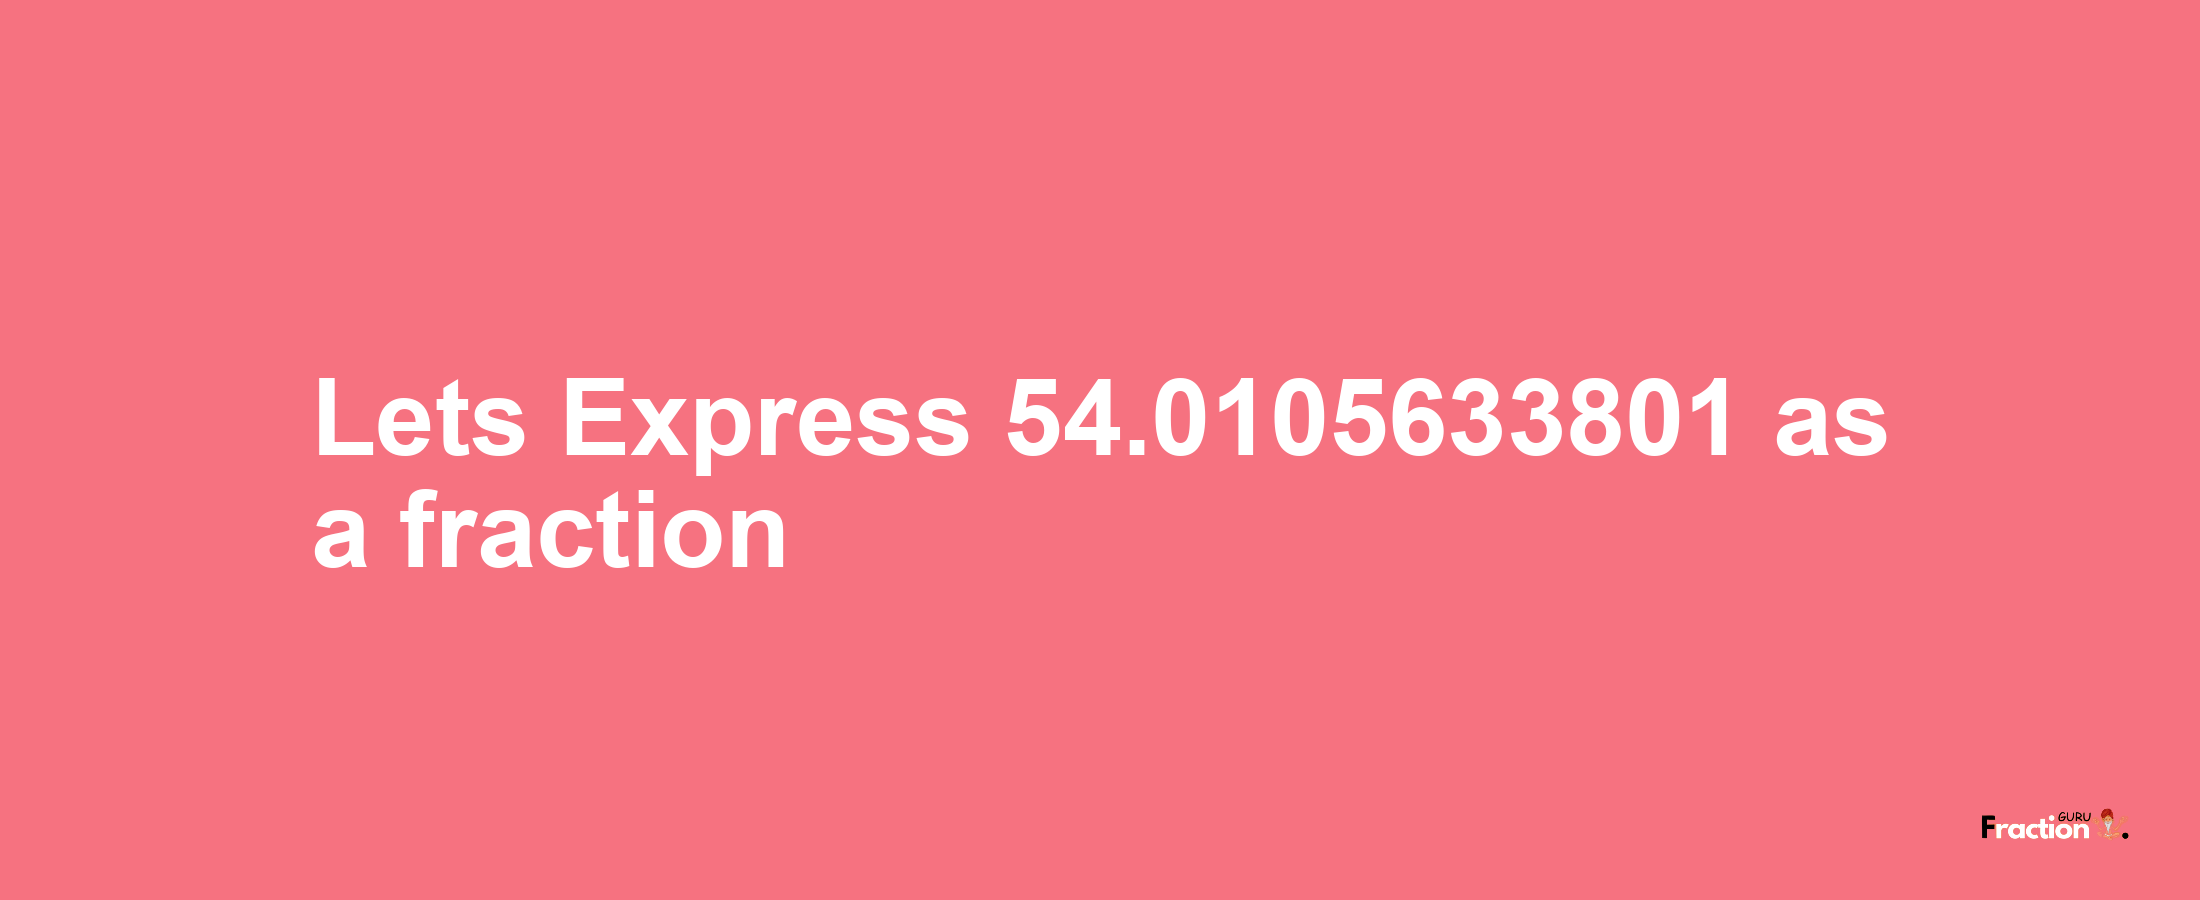 Lets Express 54.0105633801 as afraction